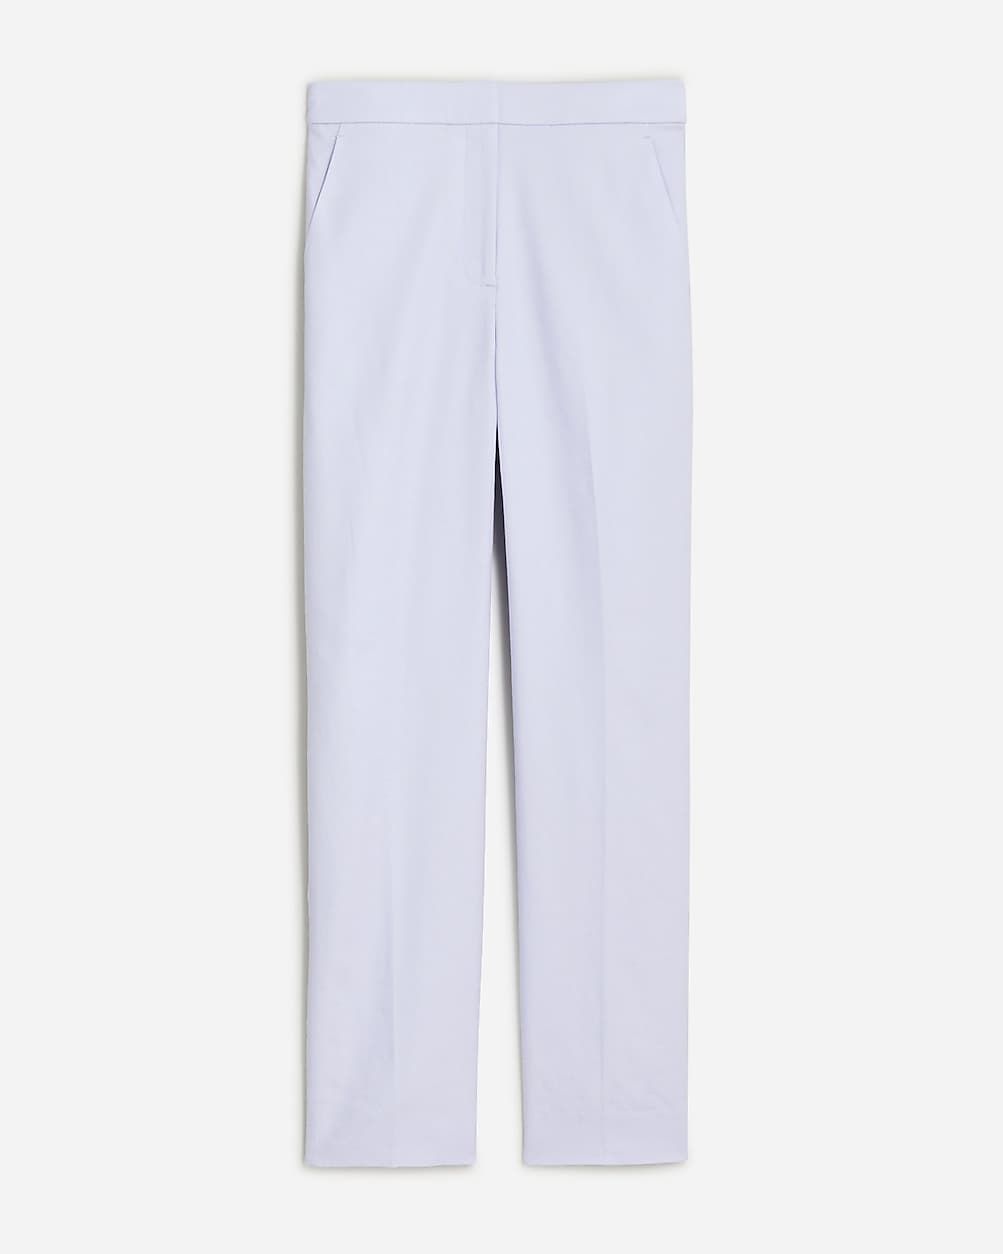 Kate straight-leg pant in stretch linen blend | J.Crew US